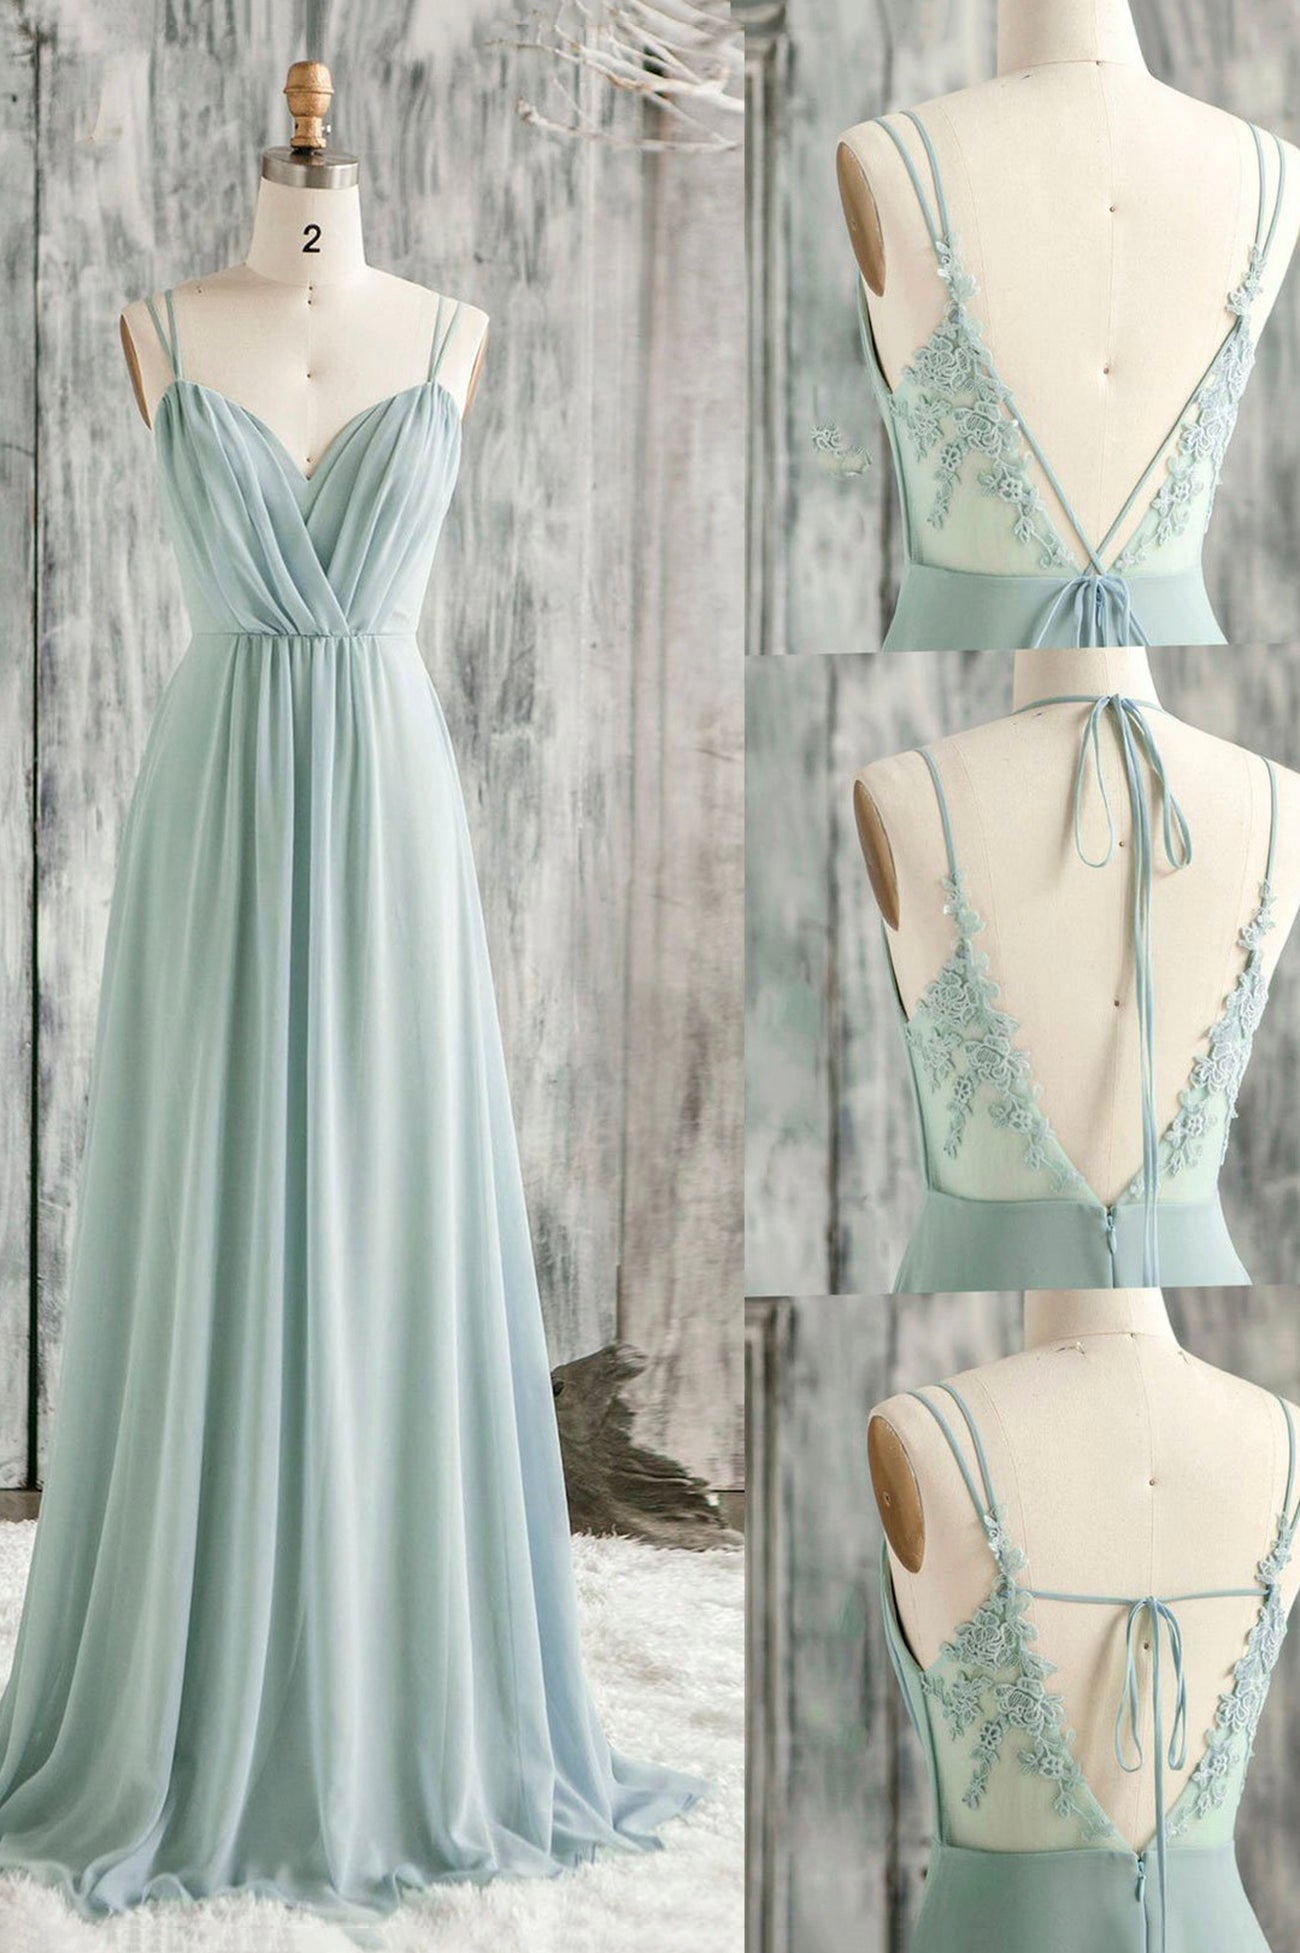 Party Dresses For Summer, A-Line Chiffon Lace Long Prom Dress, Green Spaghetti Strap Backless Evening Dress